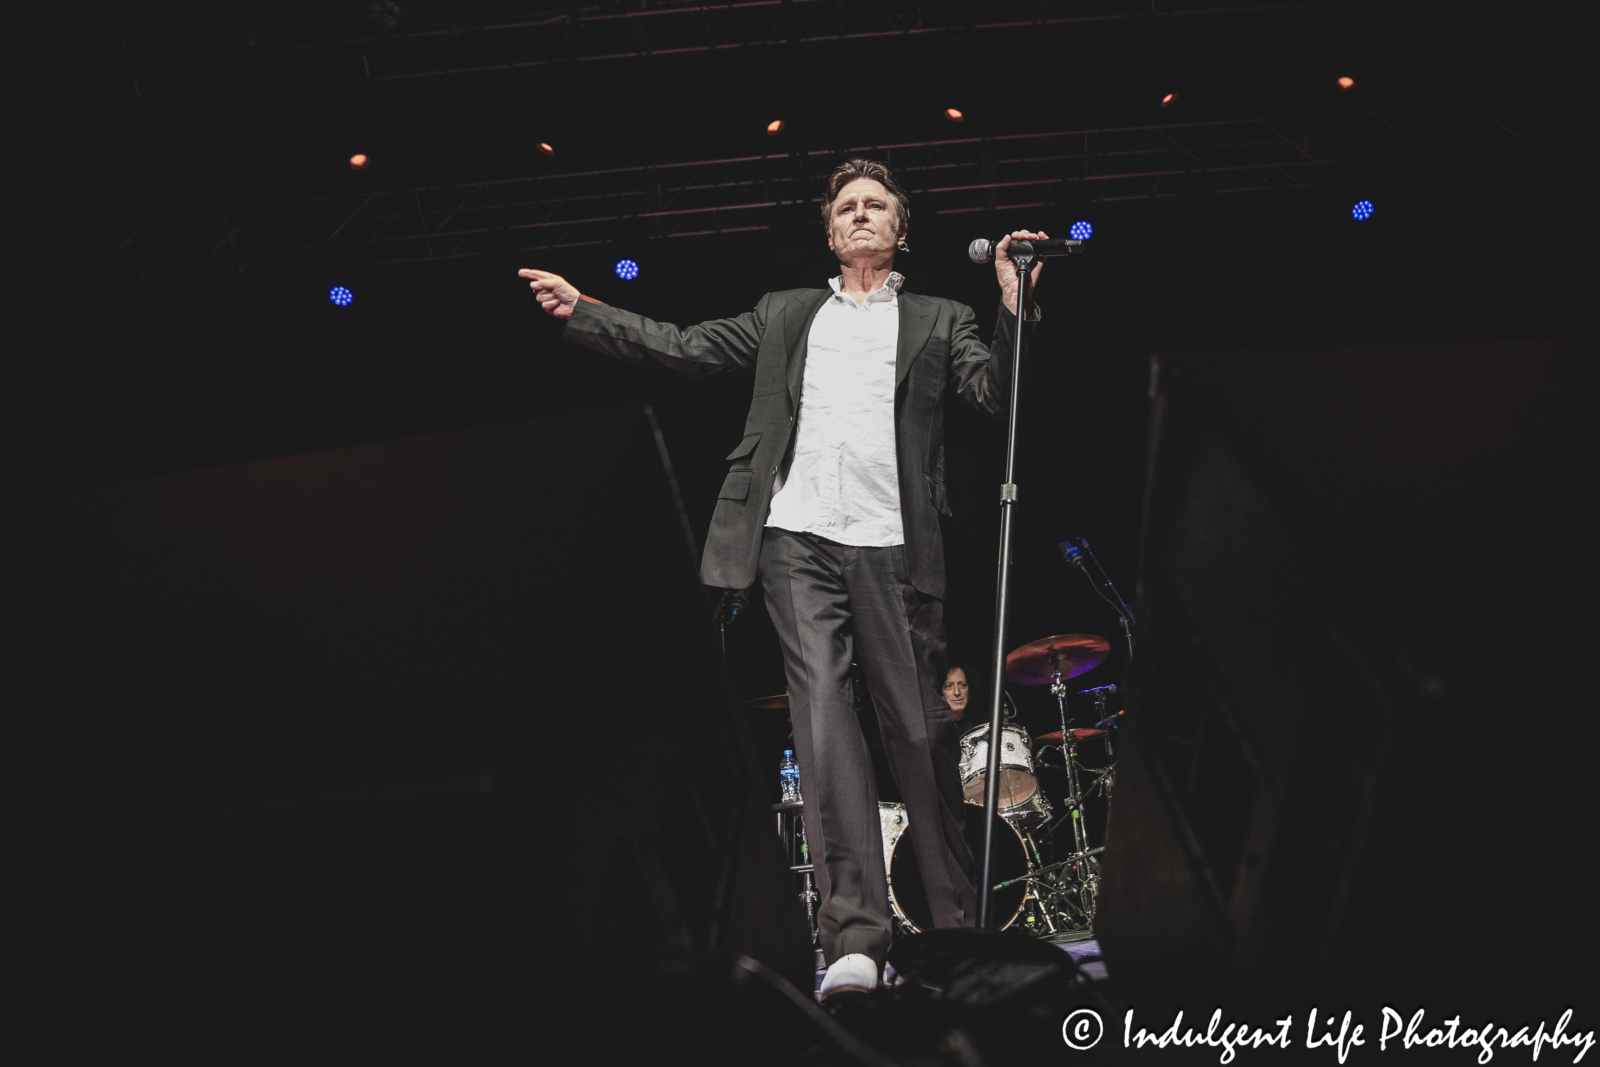 John Waite live in concert during his "Missing You" 40th Anniversary tour stop at Star Pavilion inside of Ameristar Casino in Kansas City, MO on December 8, 2023.